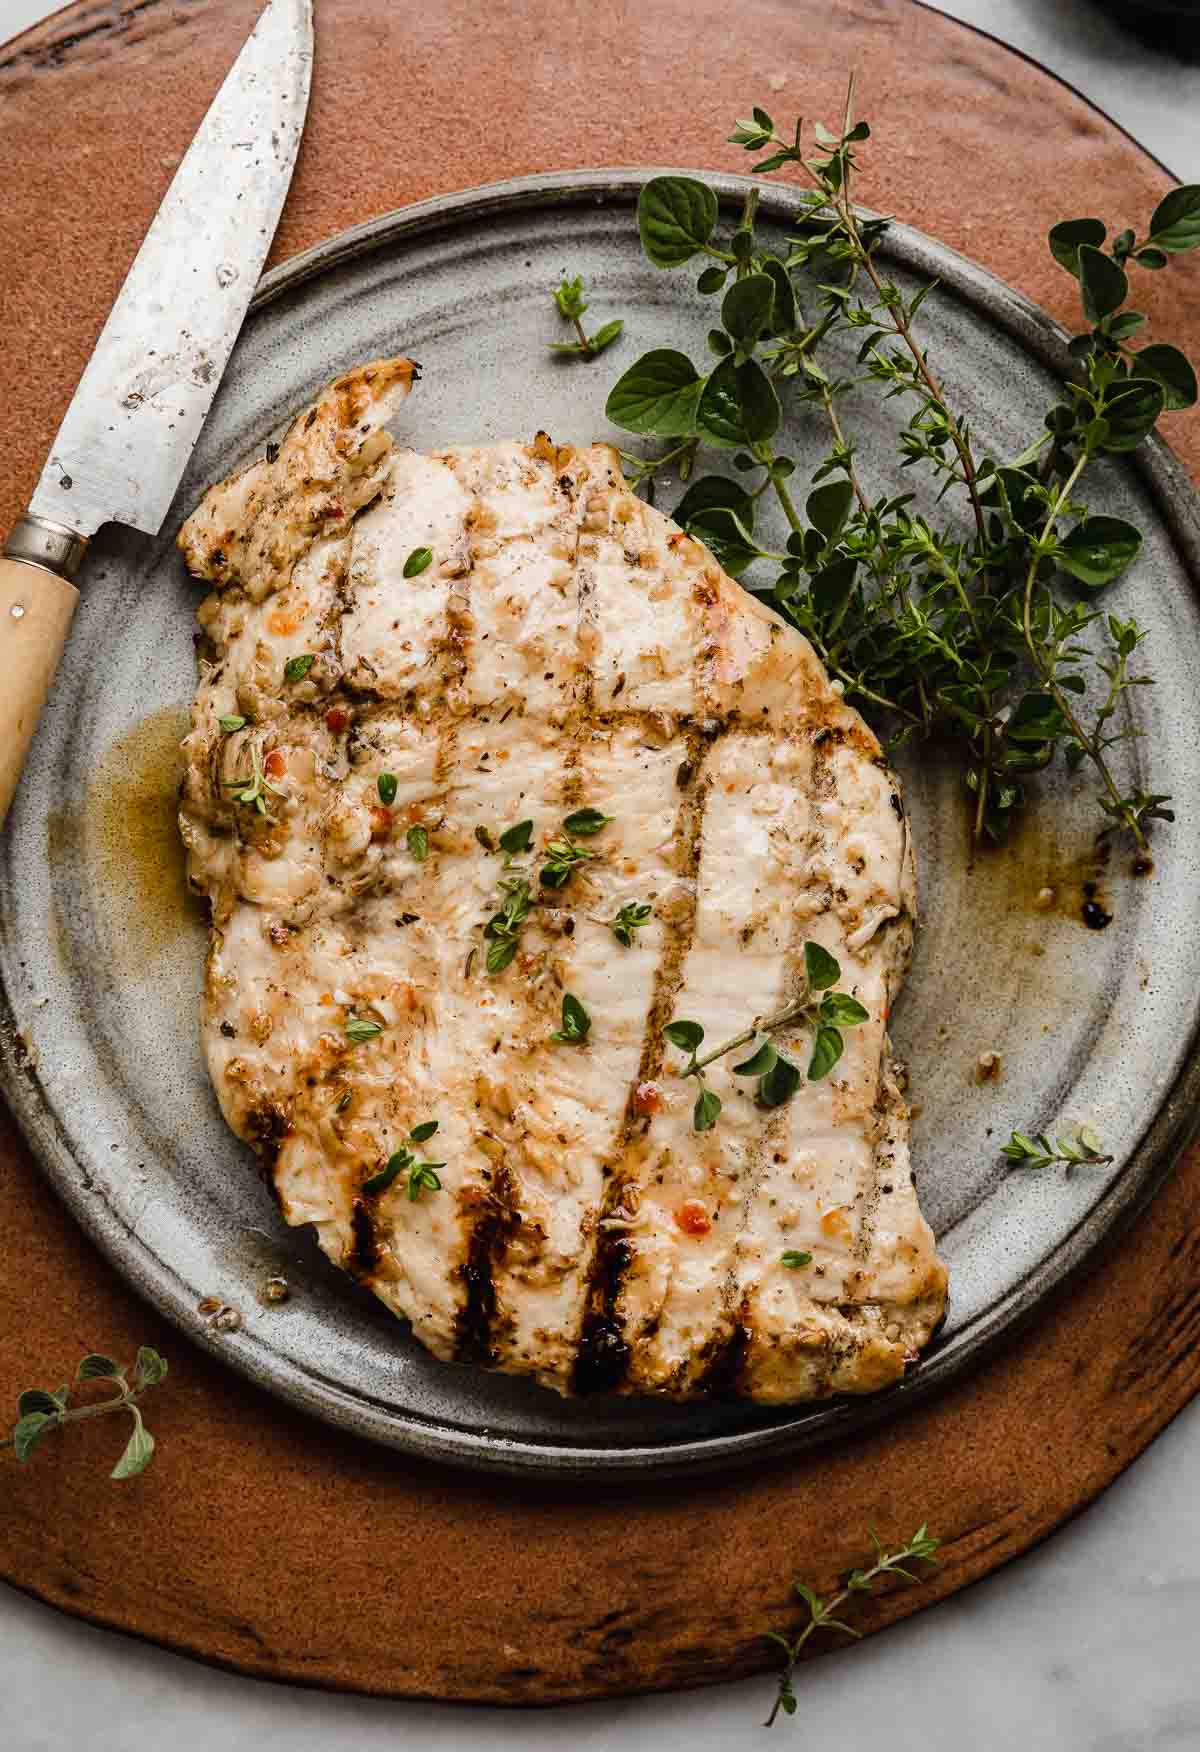 A grilled chicken that was marinated in an Italian chicken marinade, on a gray plate on a brown background.